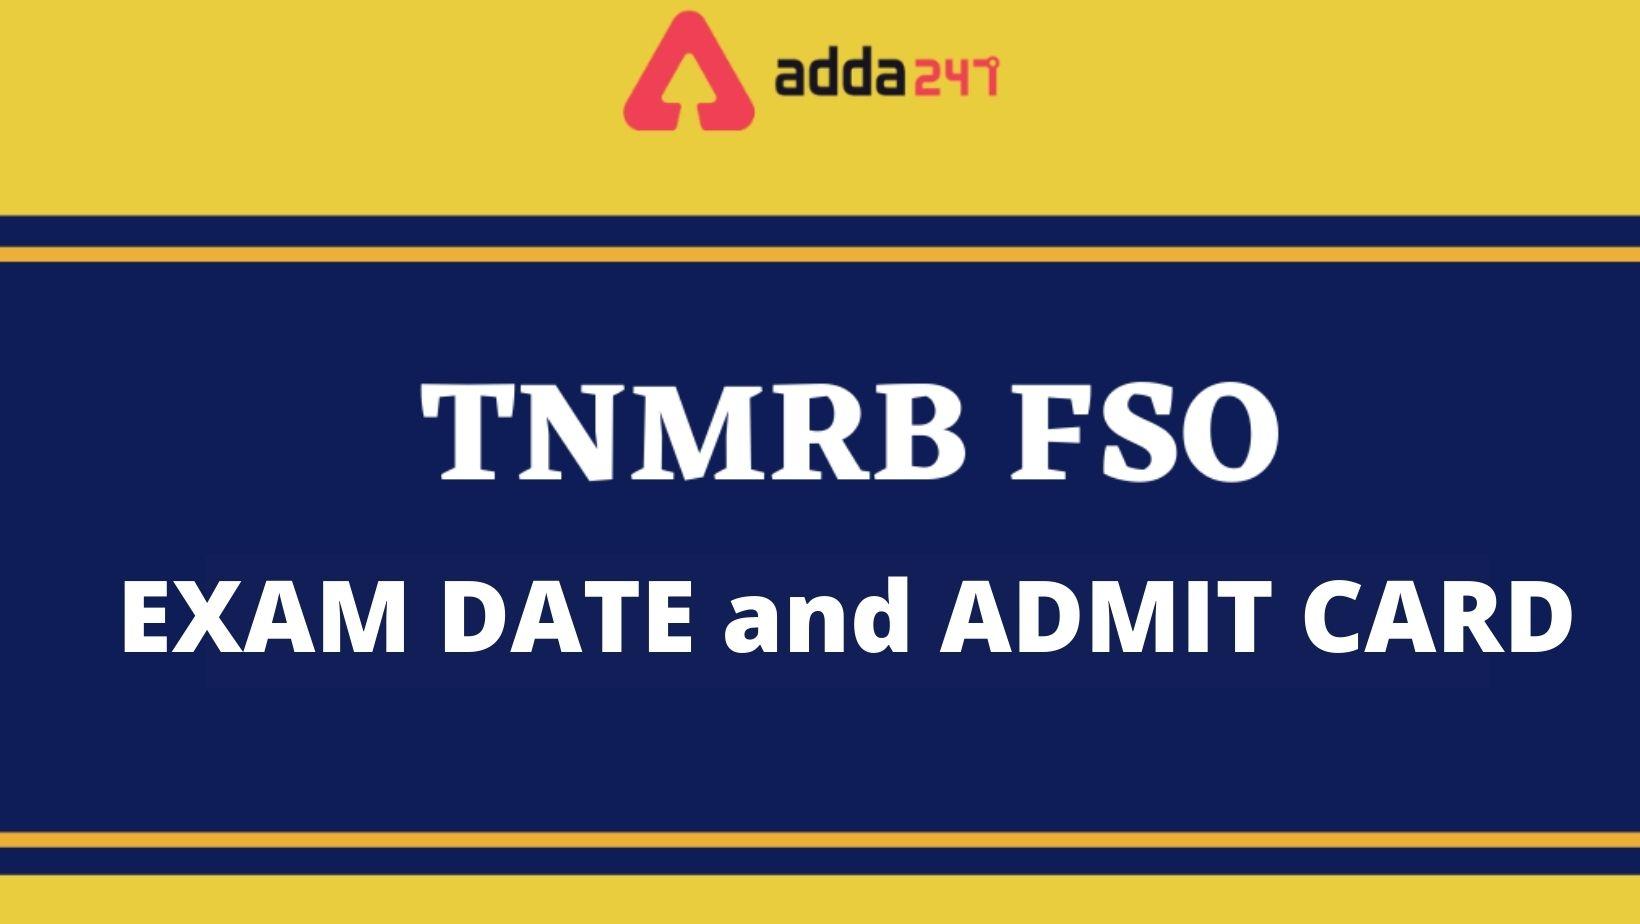 TN MRB FSO EXAM DATE and ADMIT CARD